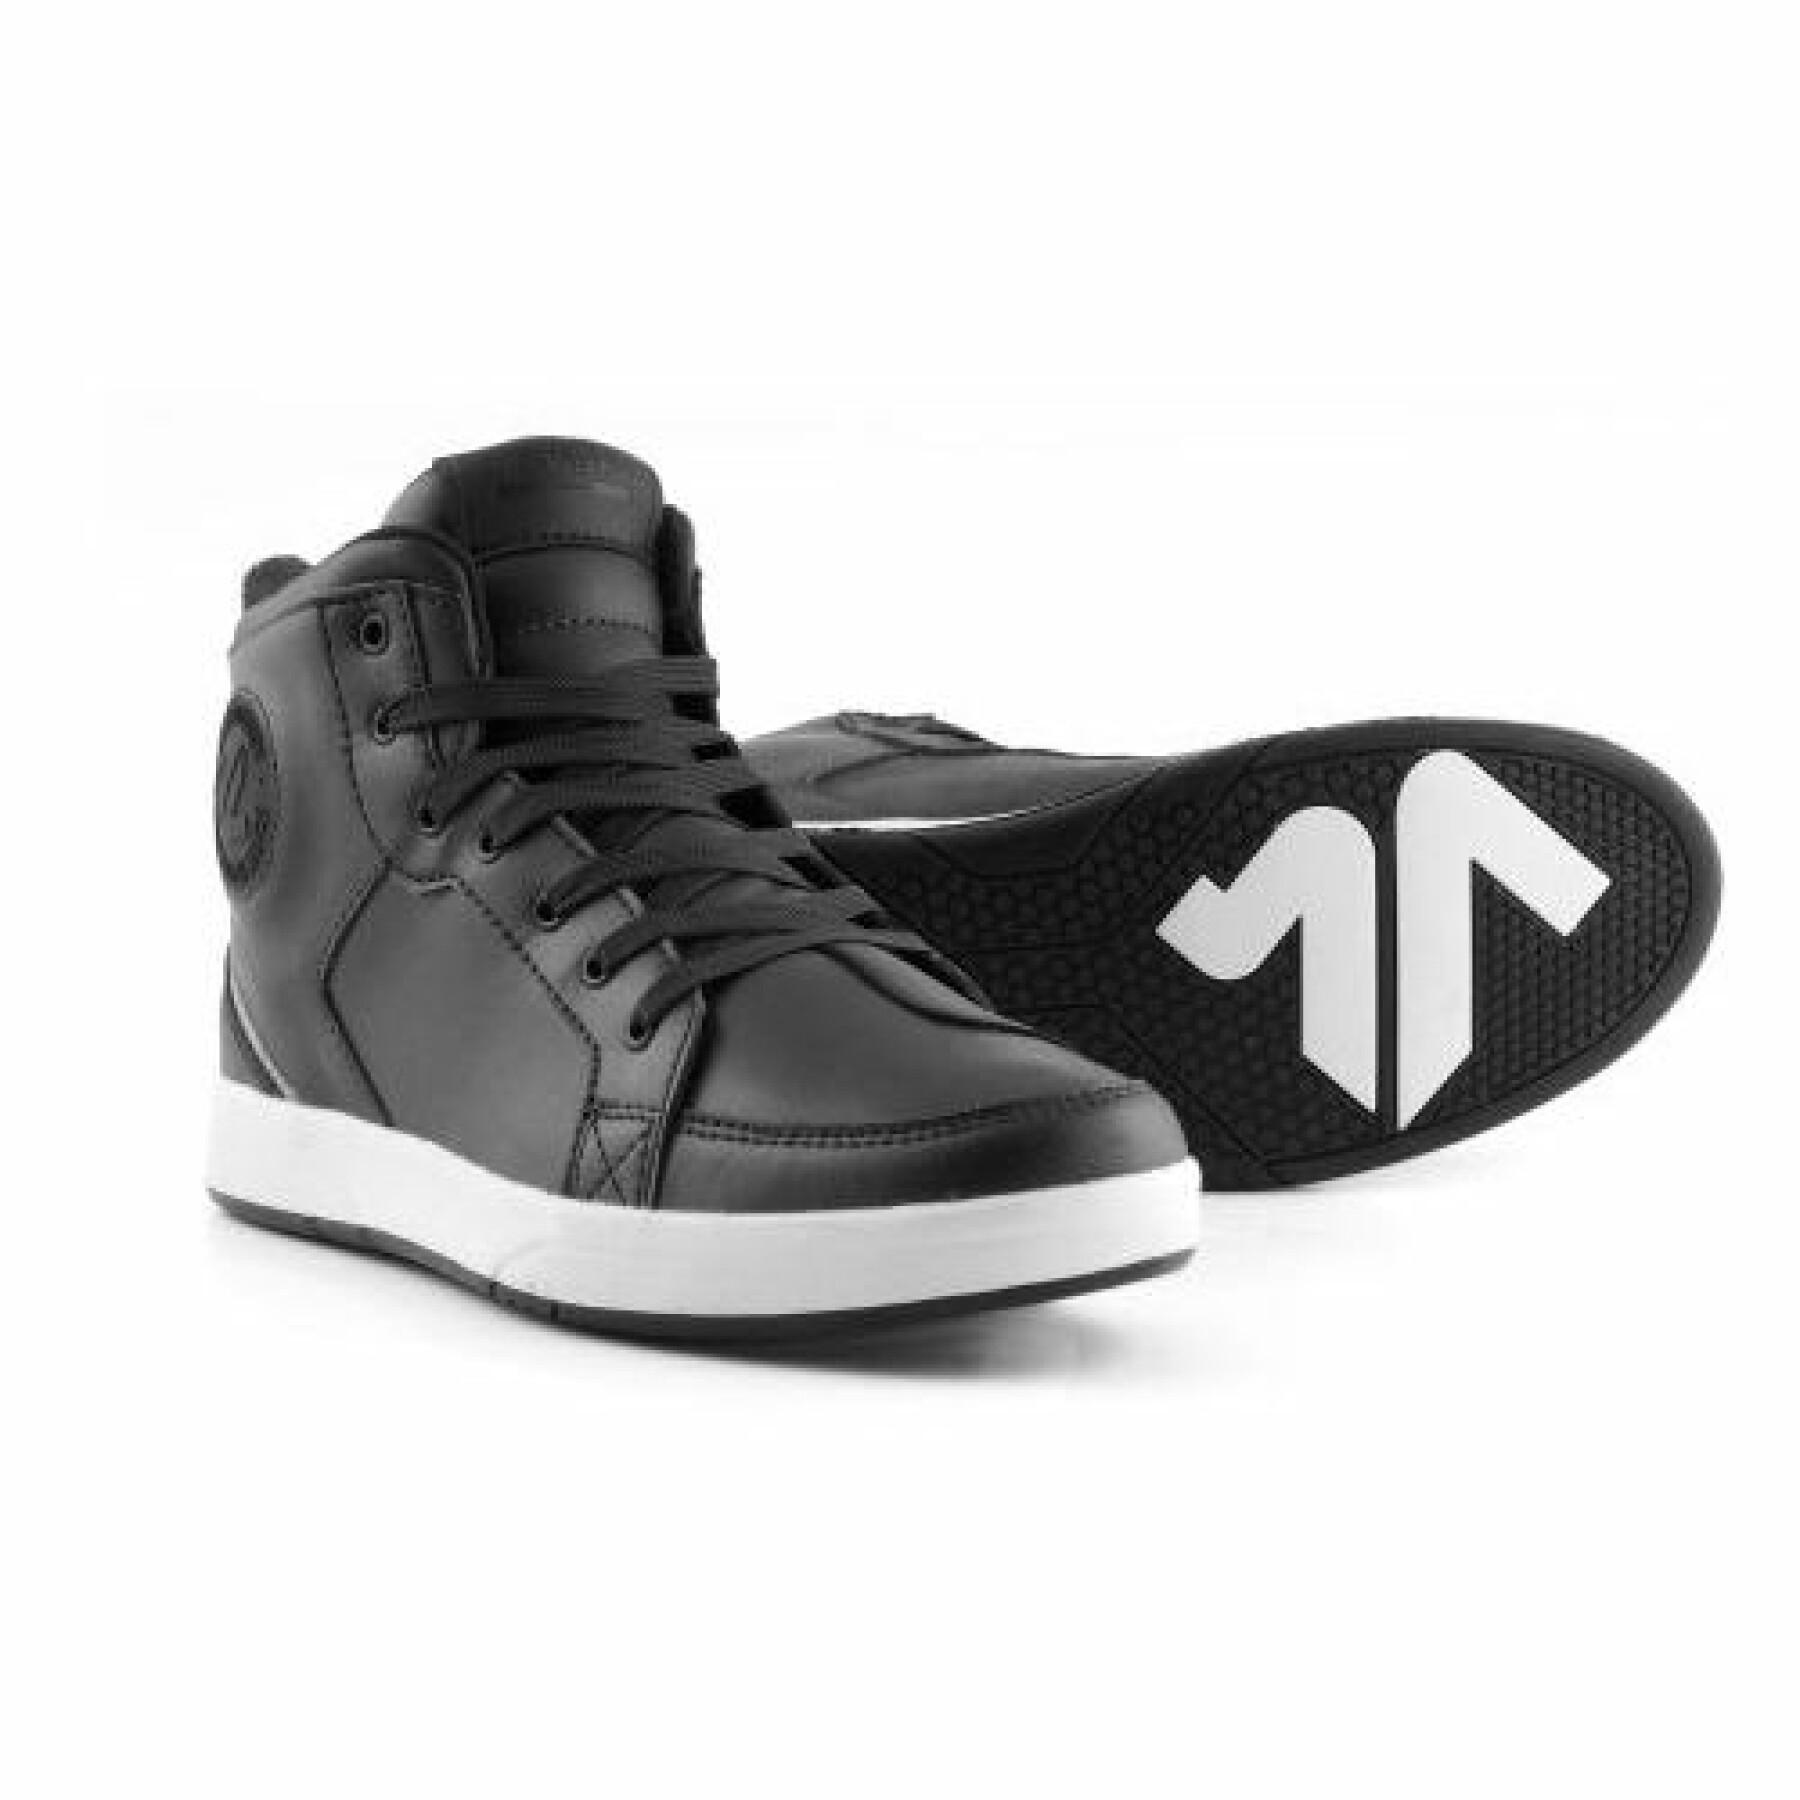 Motorcycle shoes VQuattro Twin